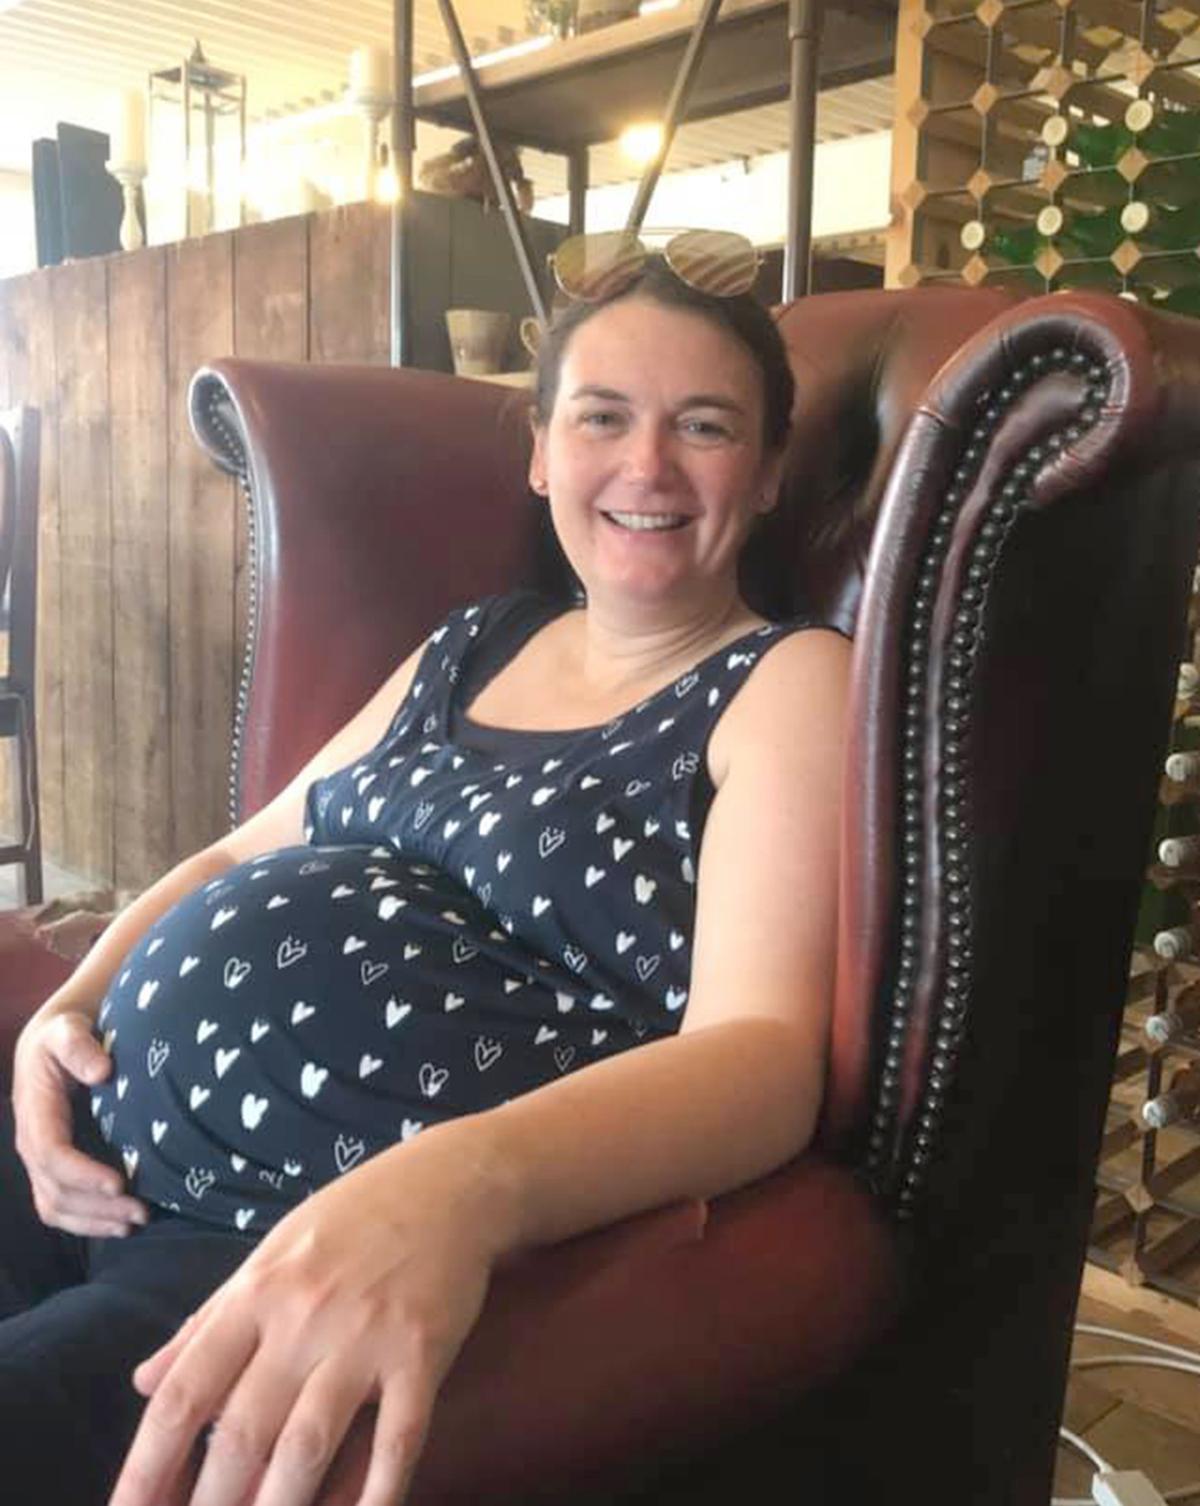 Rebecca Allen two weeks before birth. (Caters News)